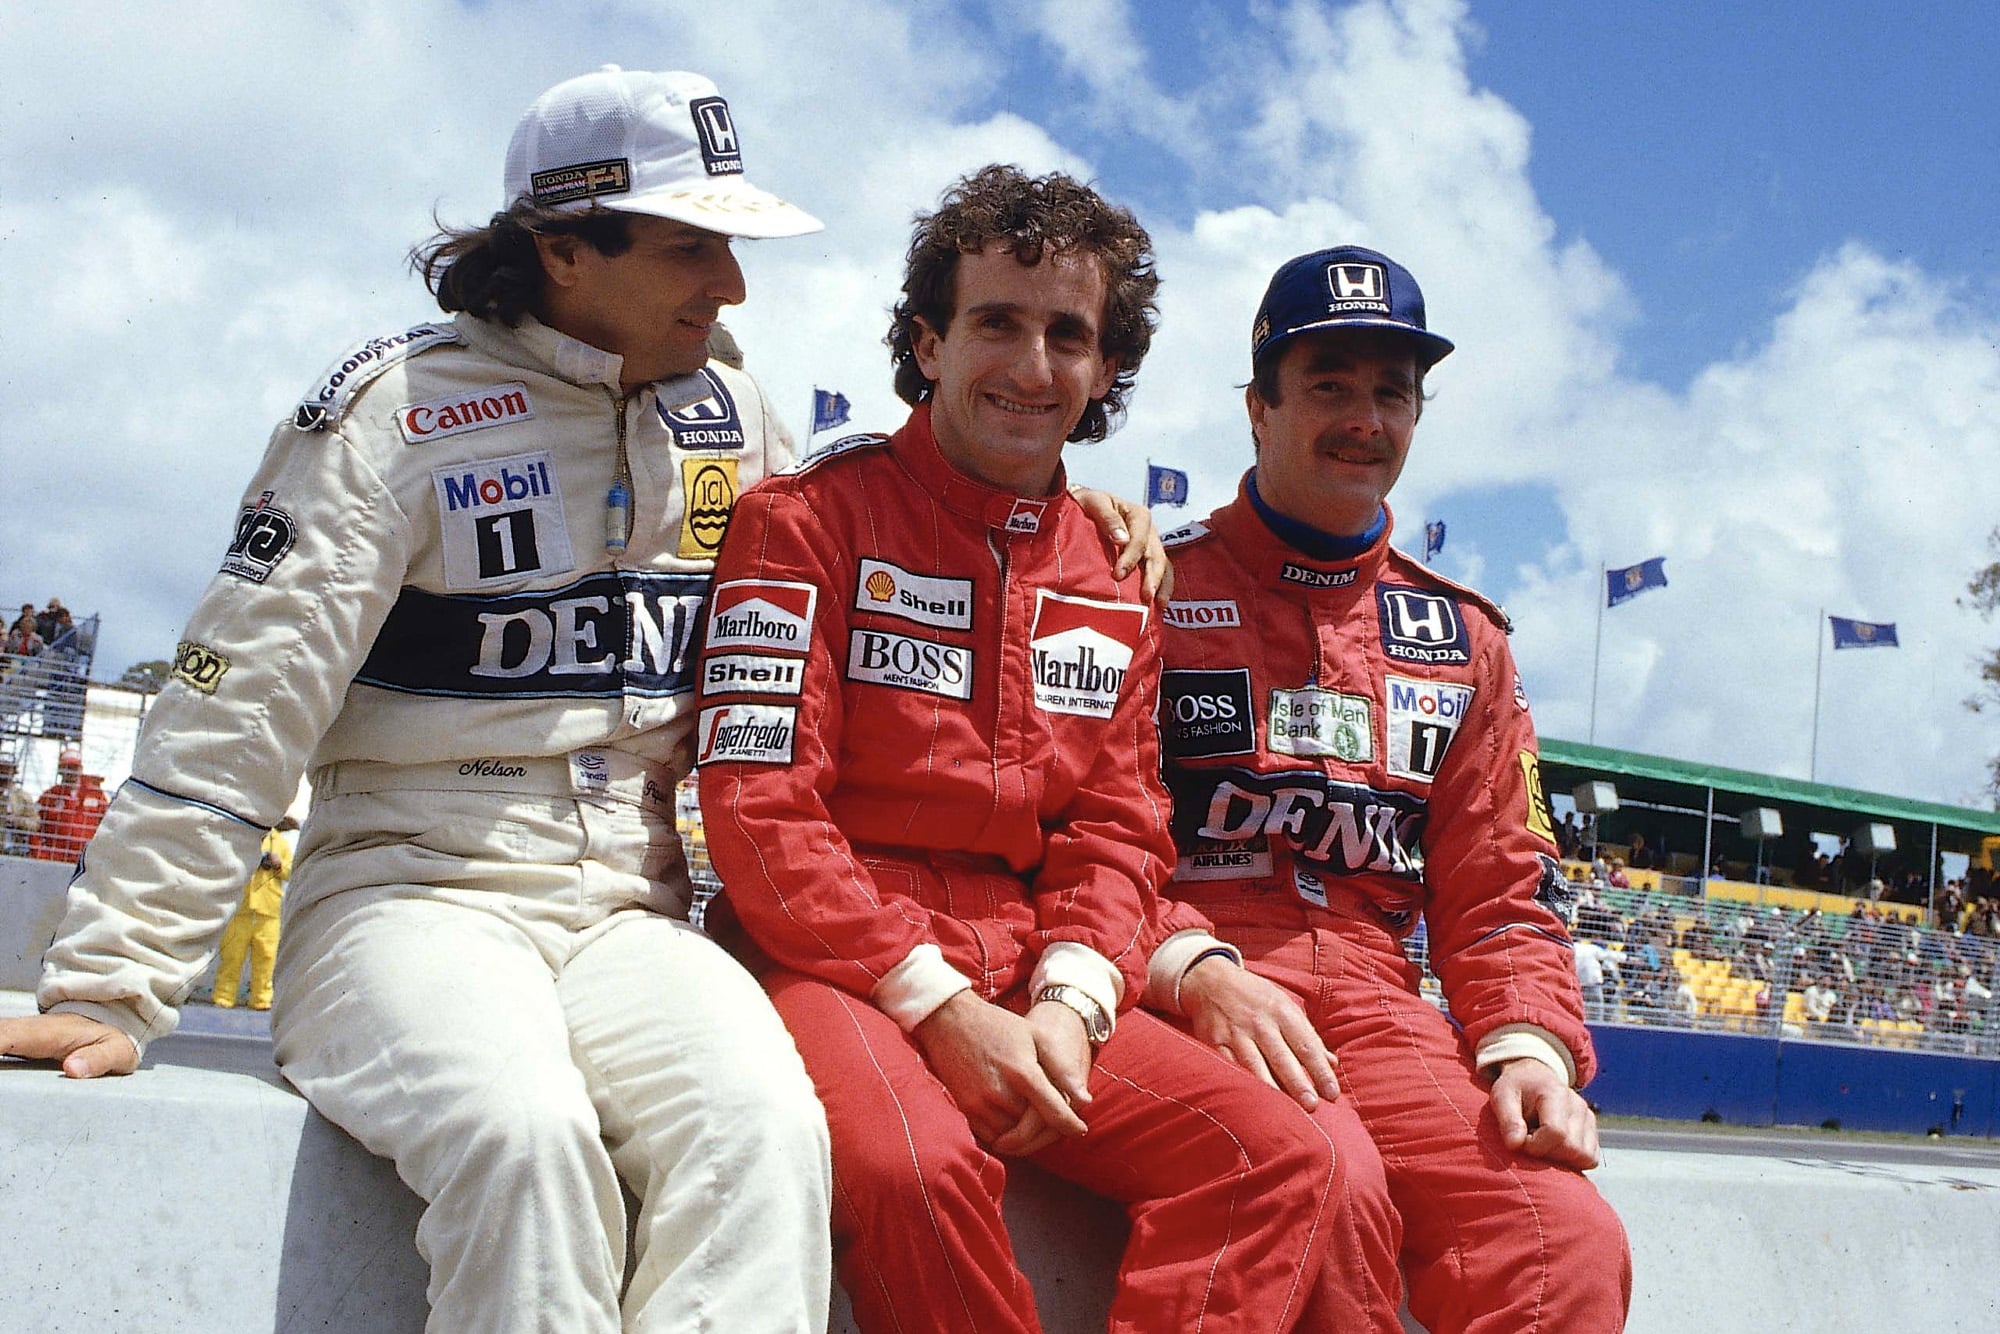 1986 title contenders Nelson Piquet, Alain Prost and Nigel Mansell